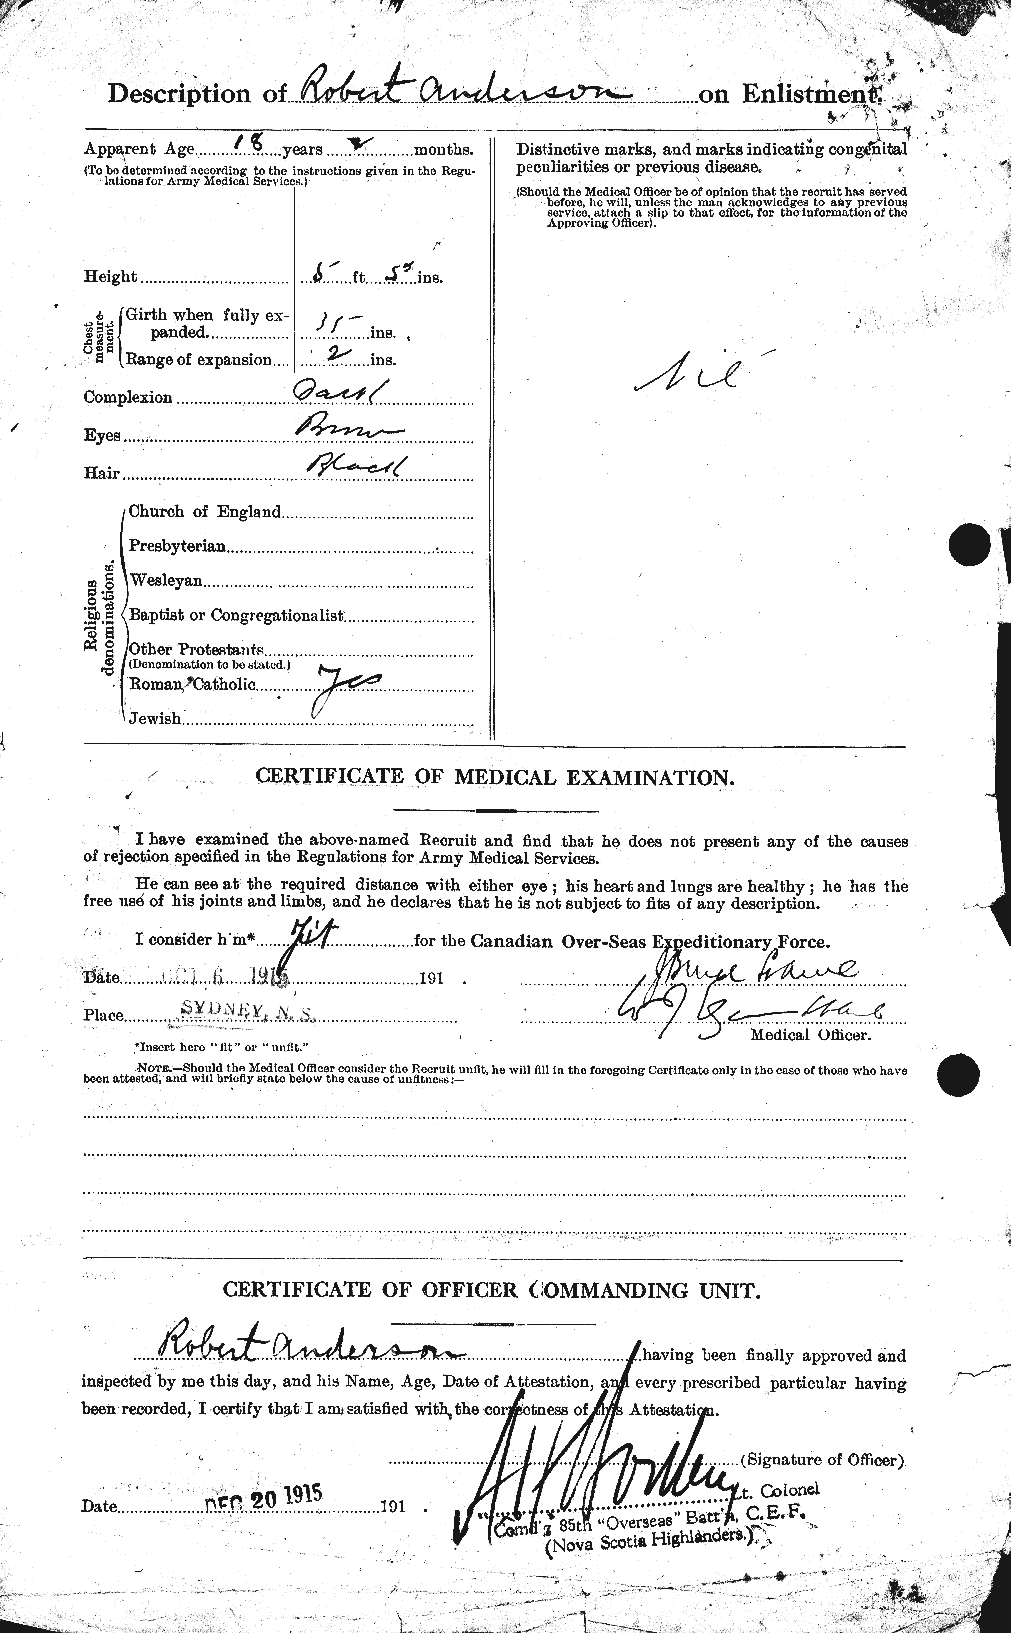 Personnel Records of the First World War - CEF 207296b